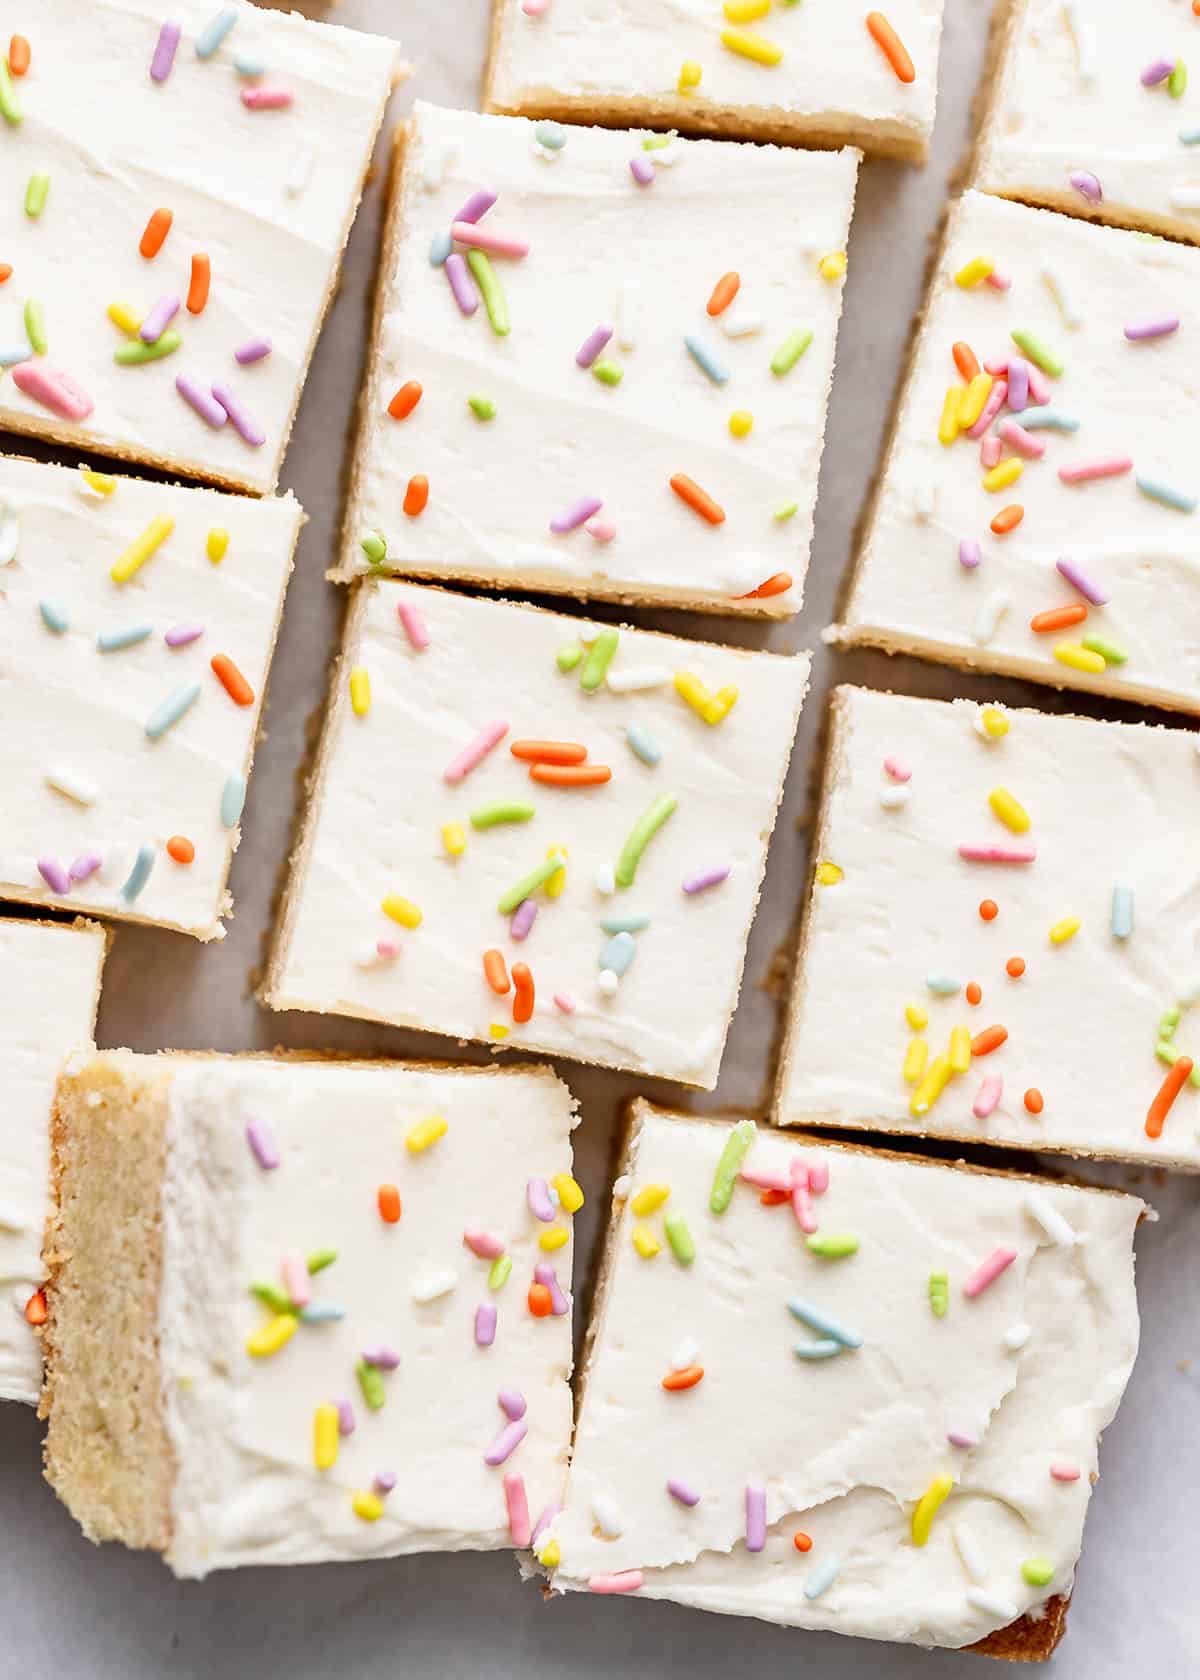 11 Sugar Cookie Bars cut into square topped with frosting and sprinkles